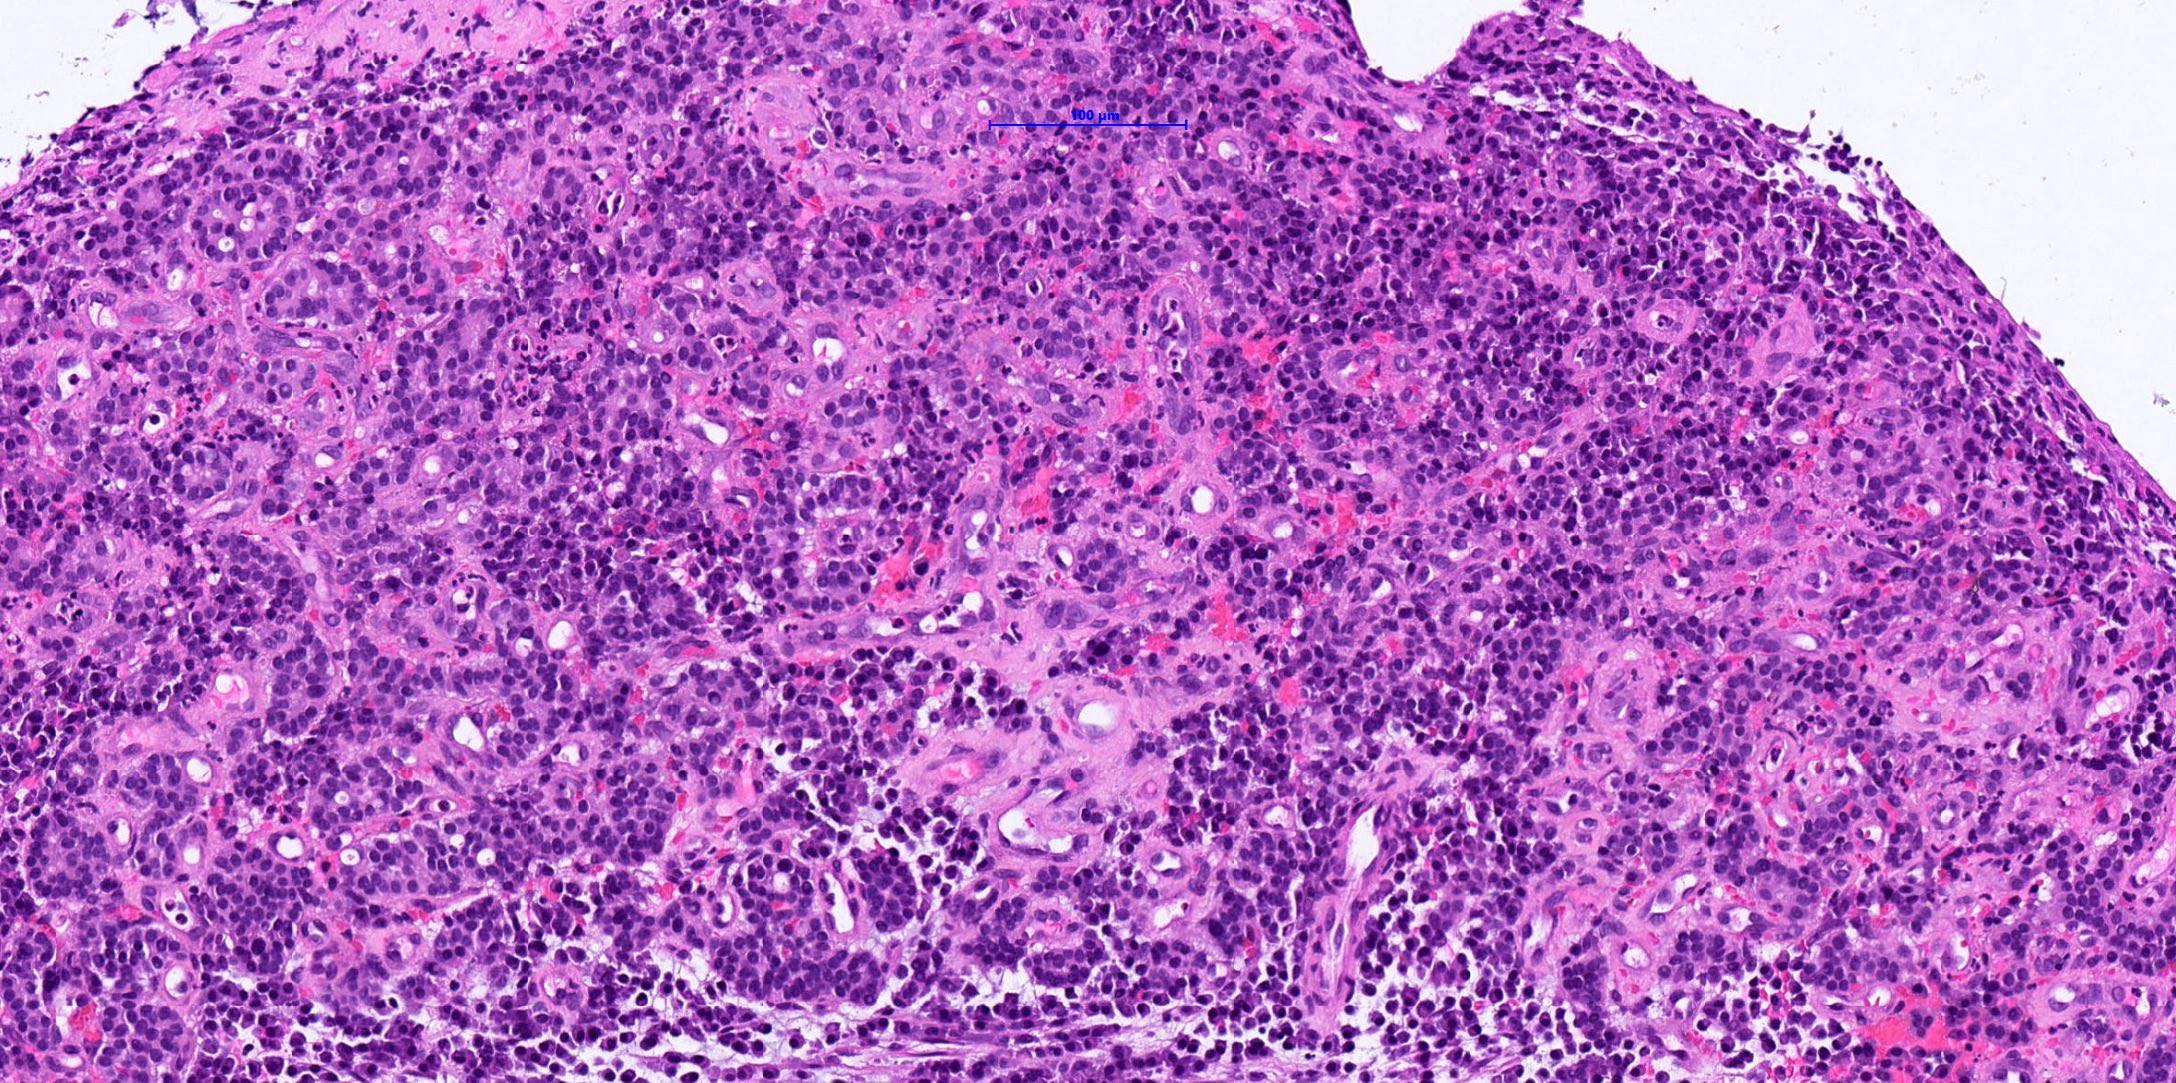 Lung carcinoid